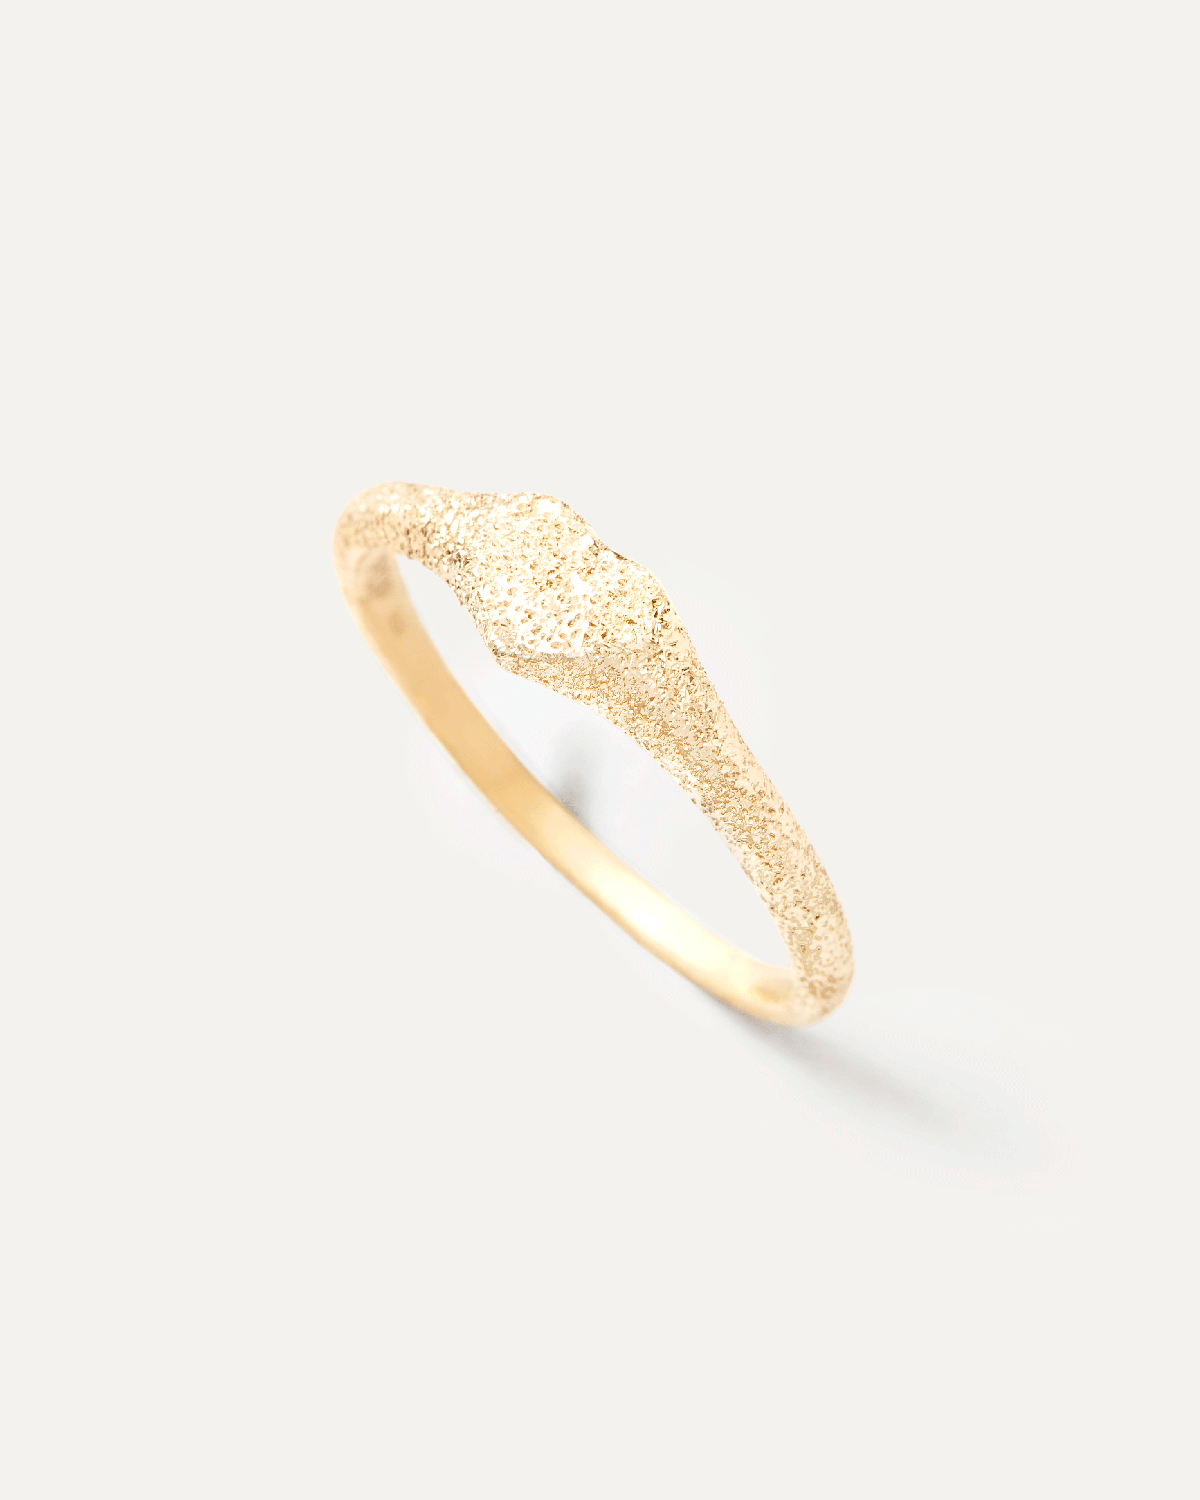 2024 Selection | Sandblasted Gold Heart Stamp Ring. Heart-shaped signet ring in solid 18K yellow gold with a sandblast finish. Get the latest arrival from PDPAOLA. Place your order safely and get this Best Seller. Free Shipping.